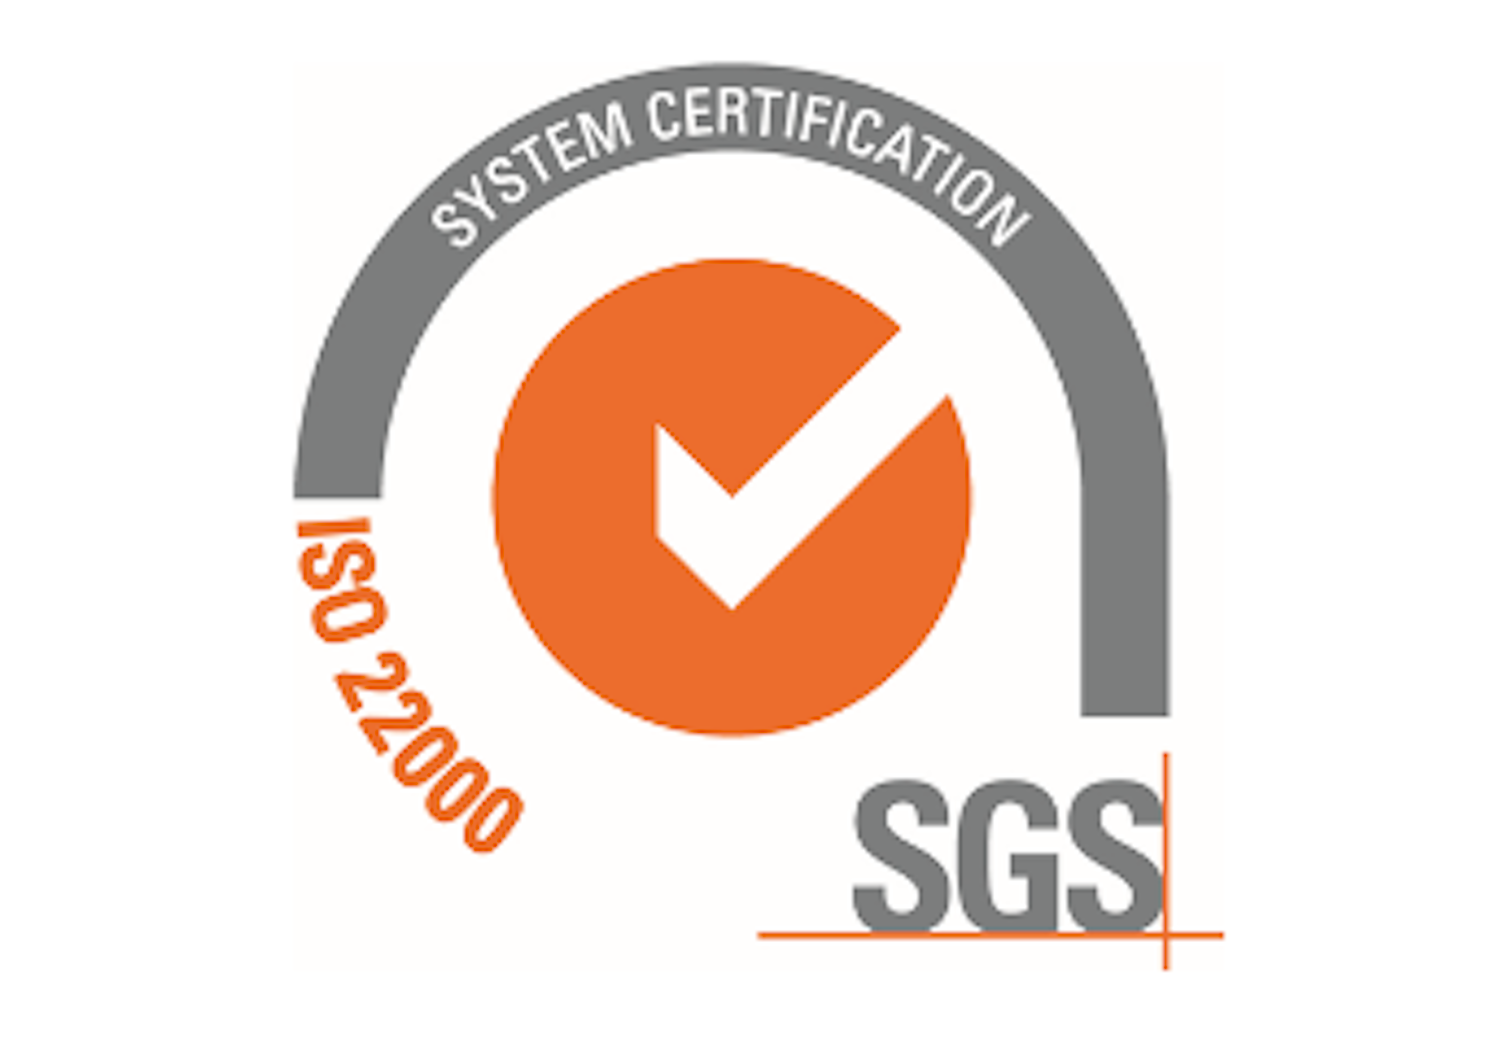 SGS ISO 22000